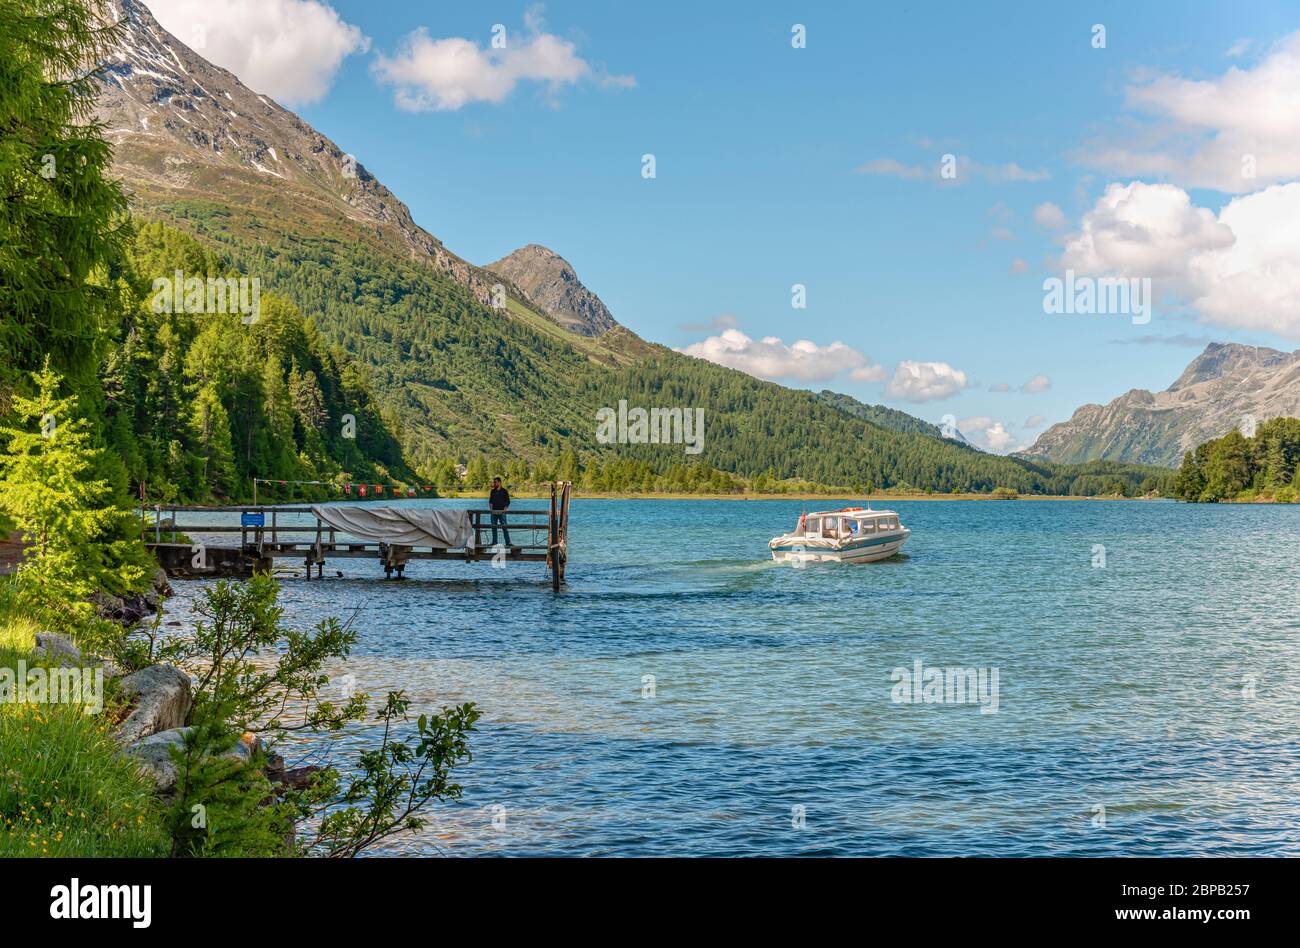 Ship of the highest shipping line in Europe on the Lake Sils, Engadin, Grisons, Switzerland Stock Photo